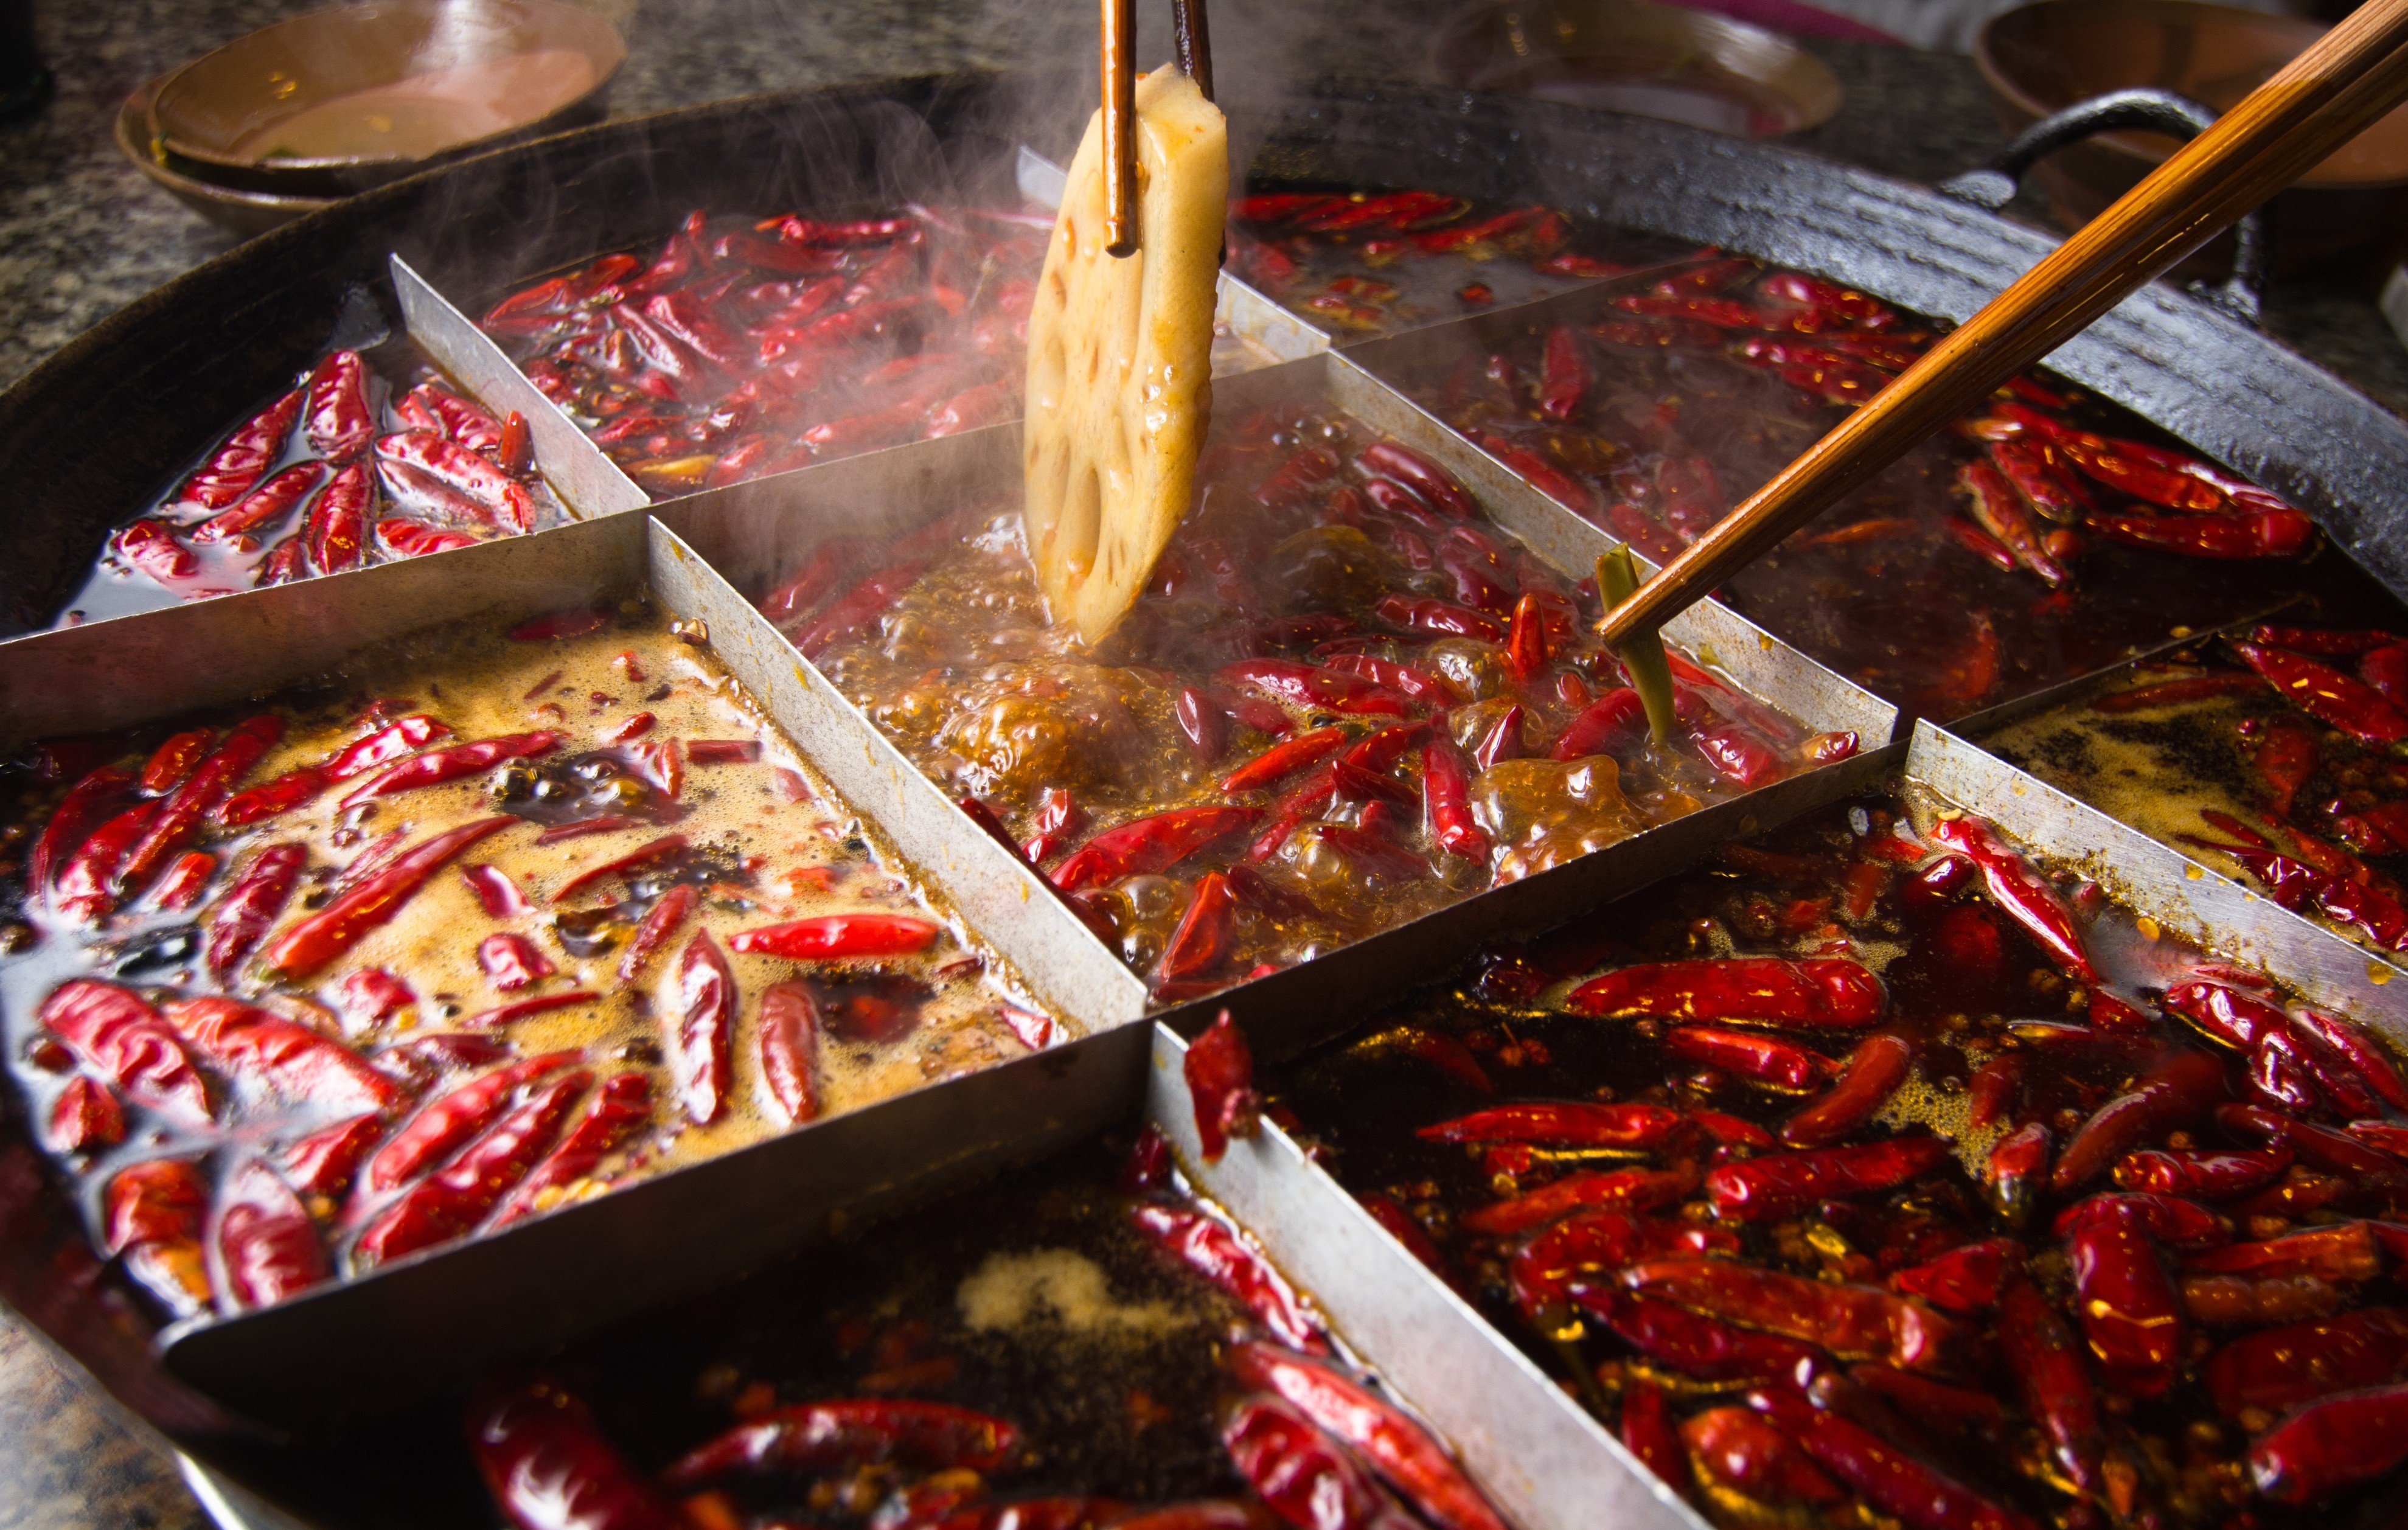 Chongqing hot pot is one of the most famous – and spiciest types – of Chinese hotpot, which is a popular and sociable choice of meal among families and groups of friends as a way to keep warm during the winter months.